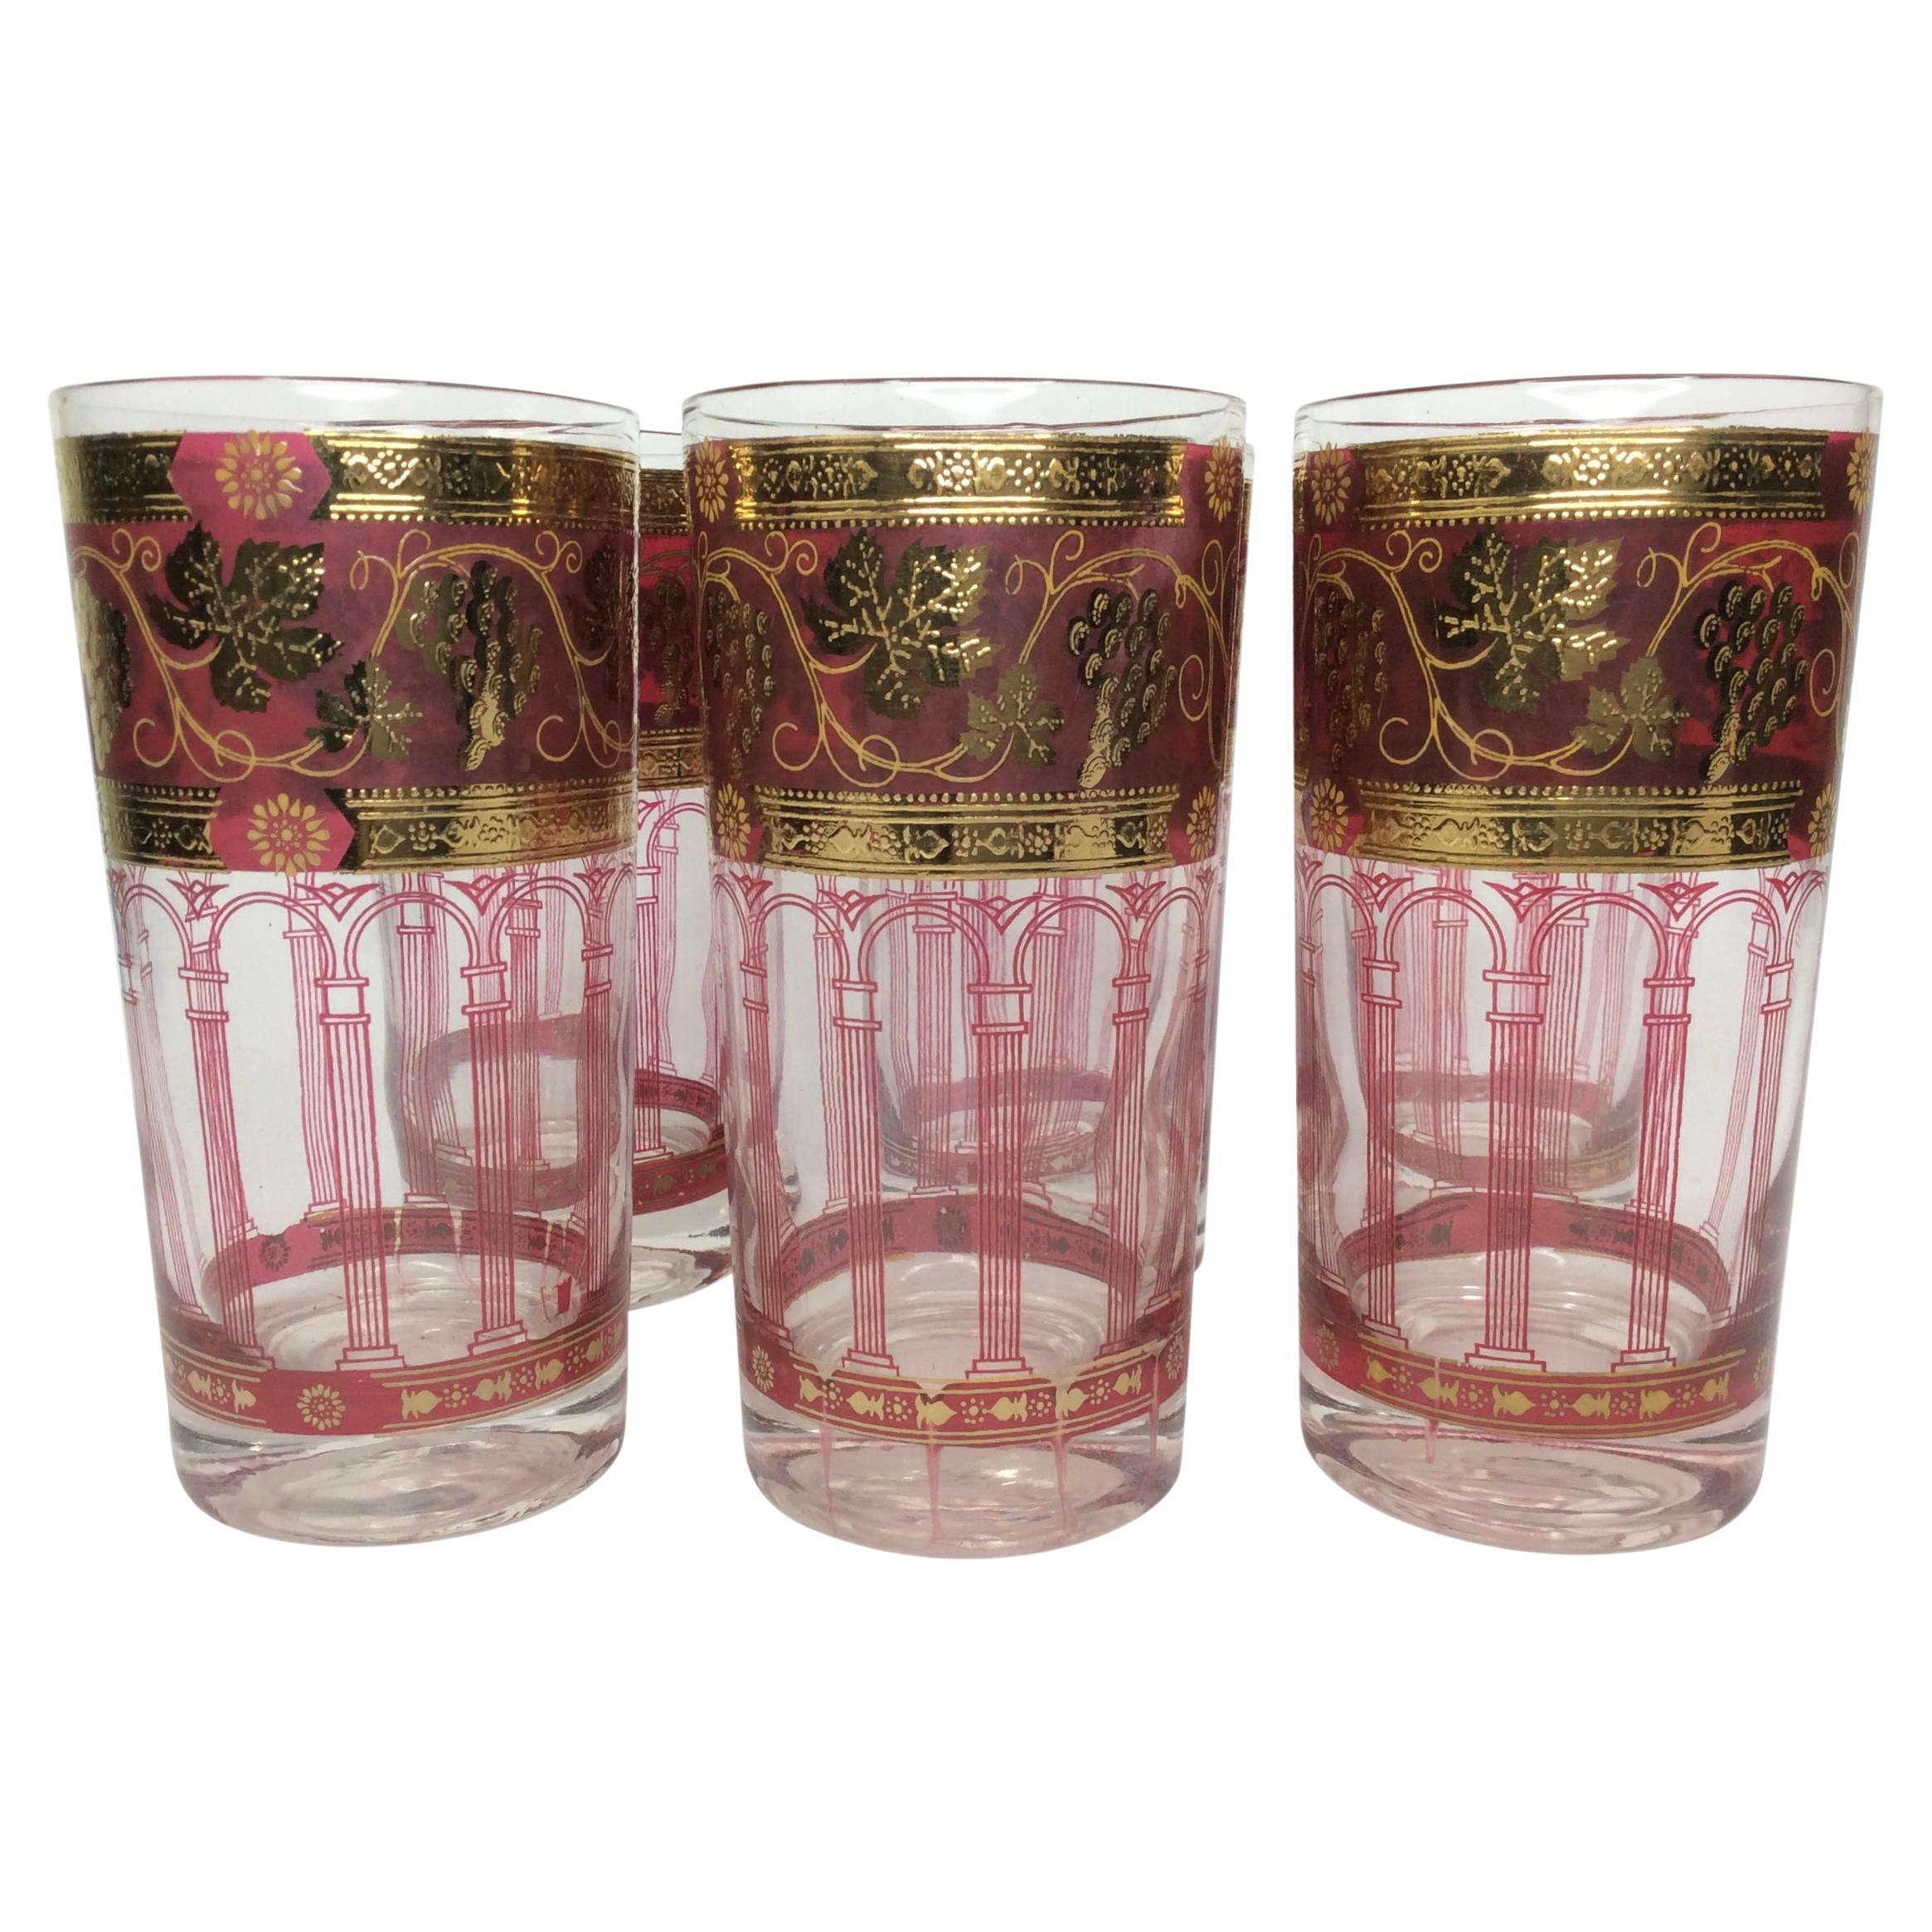 https://a.1stdibscdn.com/vintage-cera-highball-glasses-with-grapes-and-arched-columns-set-of-6-for-sale/f_73712/f_358198921692737803792/f_35819892_1692737804688_bg_processed.jpg